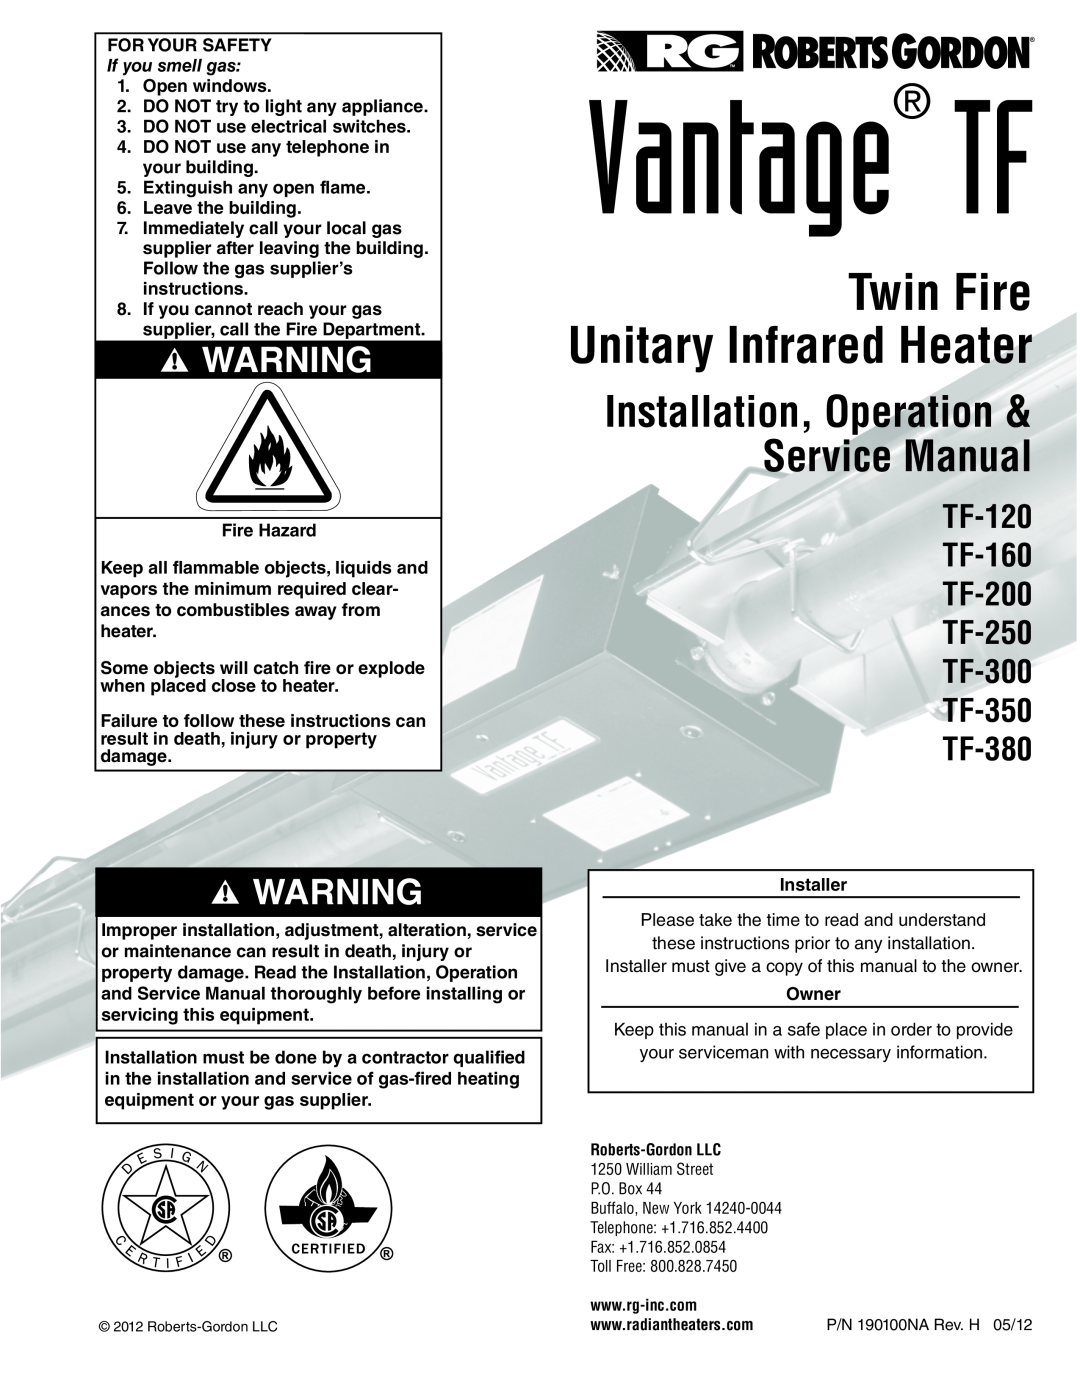 Roberts Gorden TF-300, TF-350, TF-120, TF-200 service manual Vantage TF, Twin Fire Unitary Infrared Heater, If you smell gas 